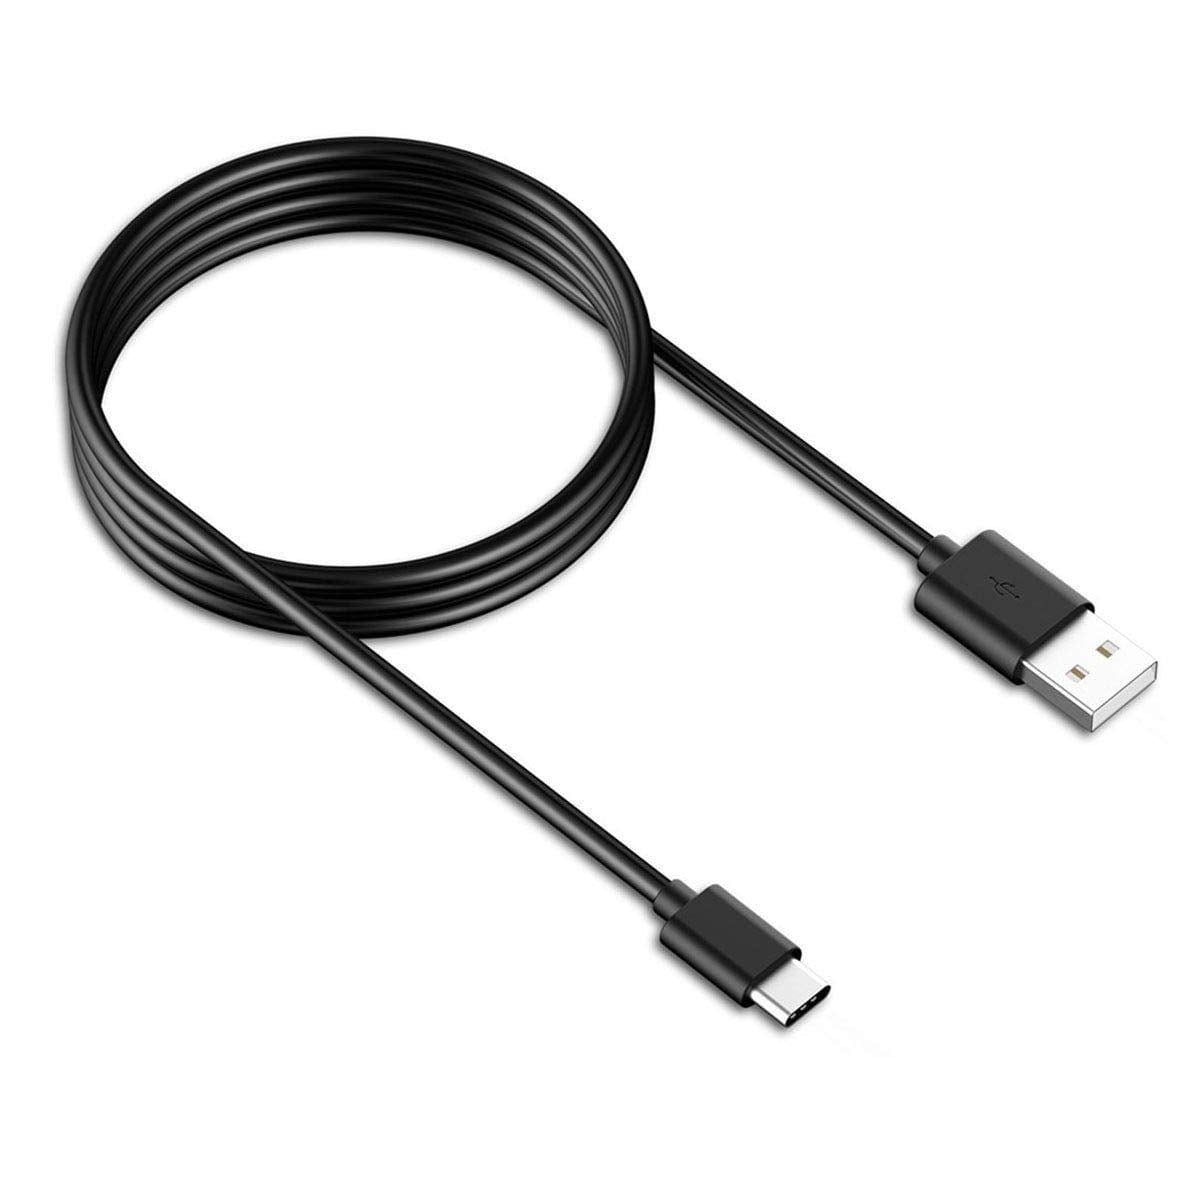 Samsung Galaxy A20e USB to Type C Charging Cable Lead Black - 1M - SmartPhoneGadgetUK